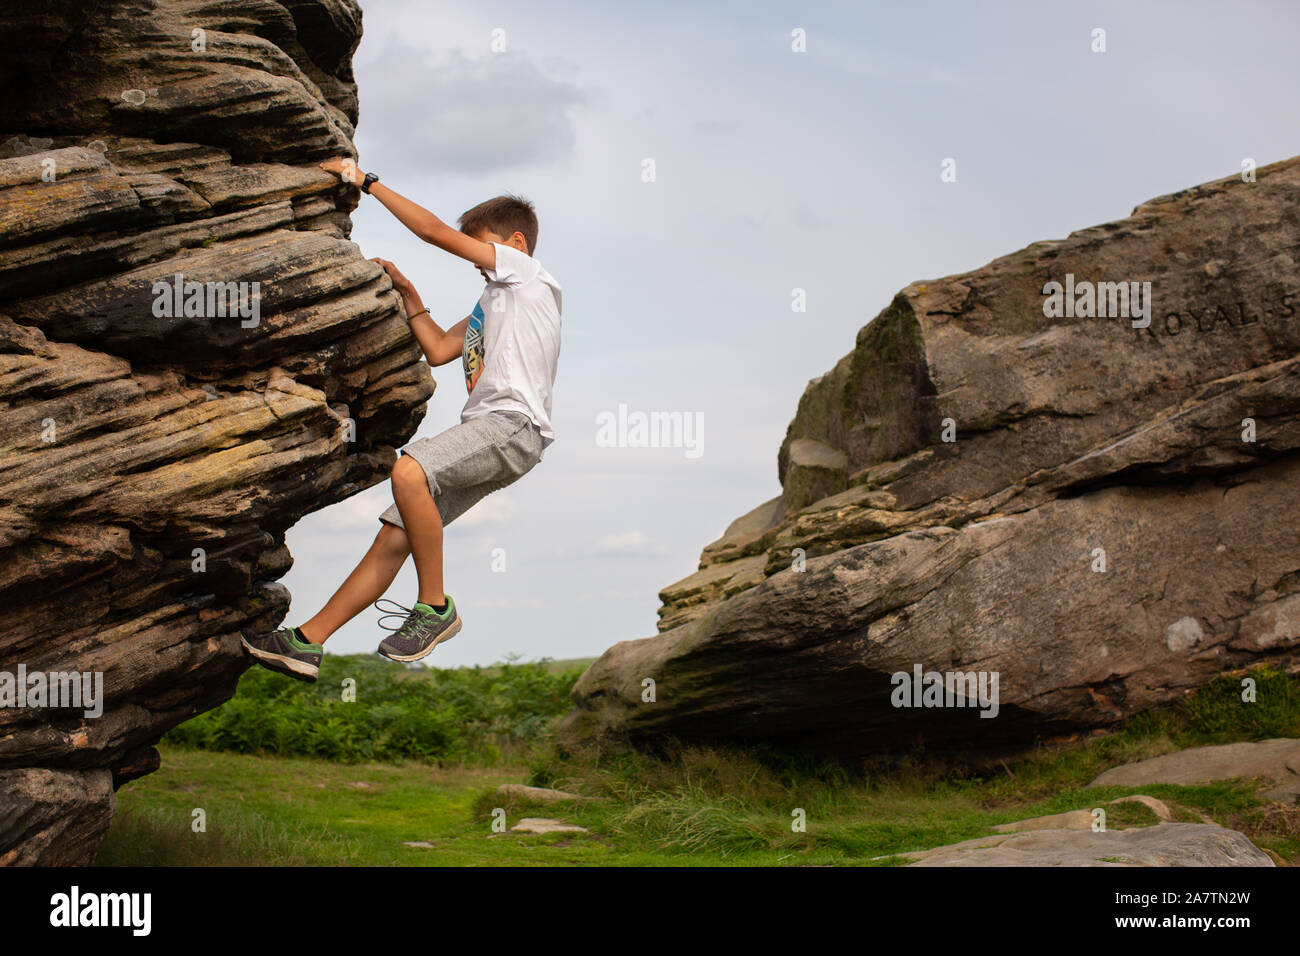 An 11 year old boy climbing on the Three Ships in the Peak District, England, UK Stock Photo